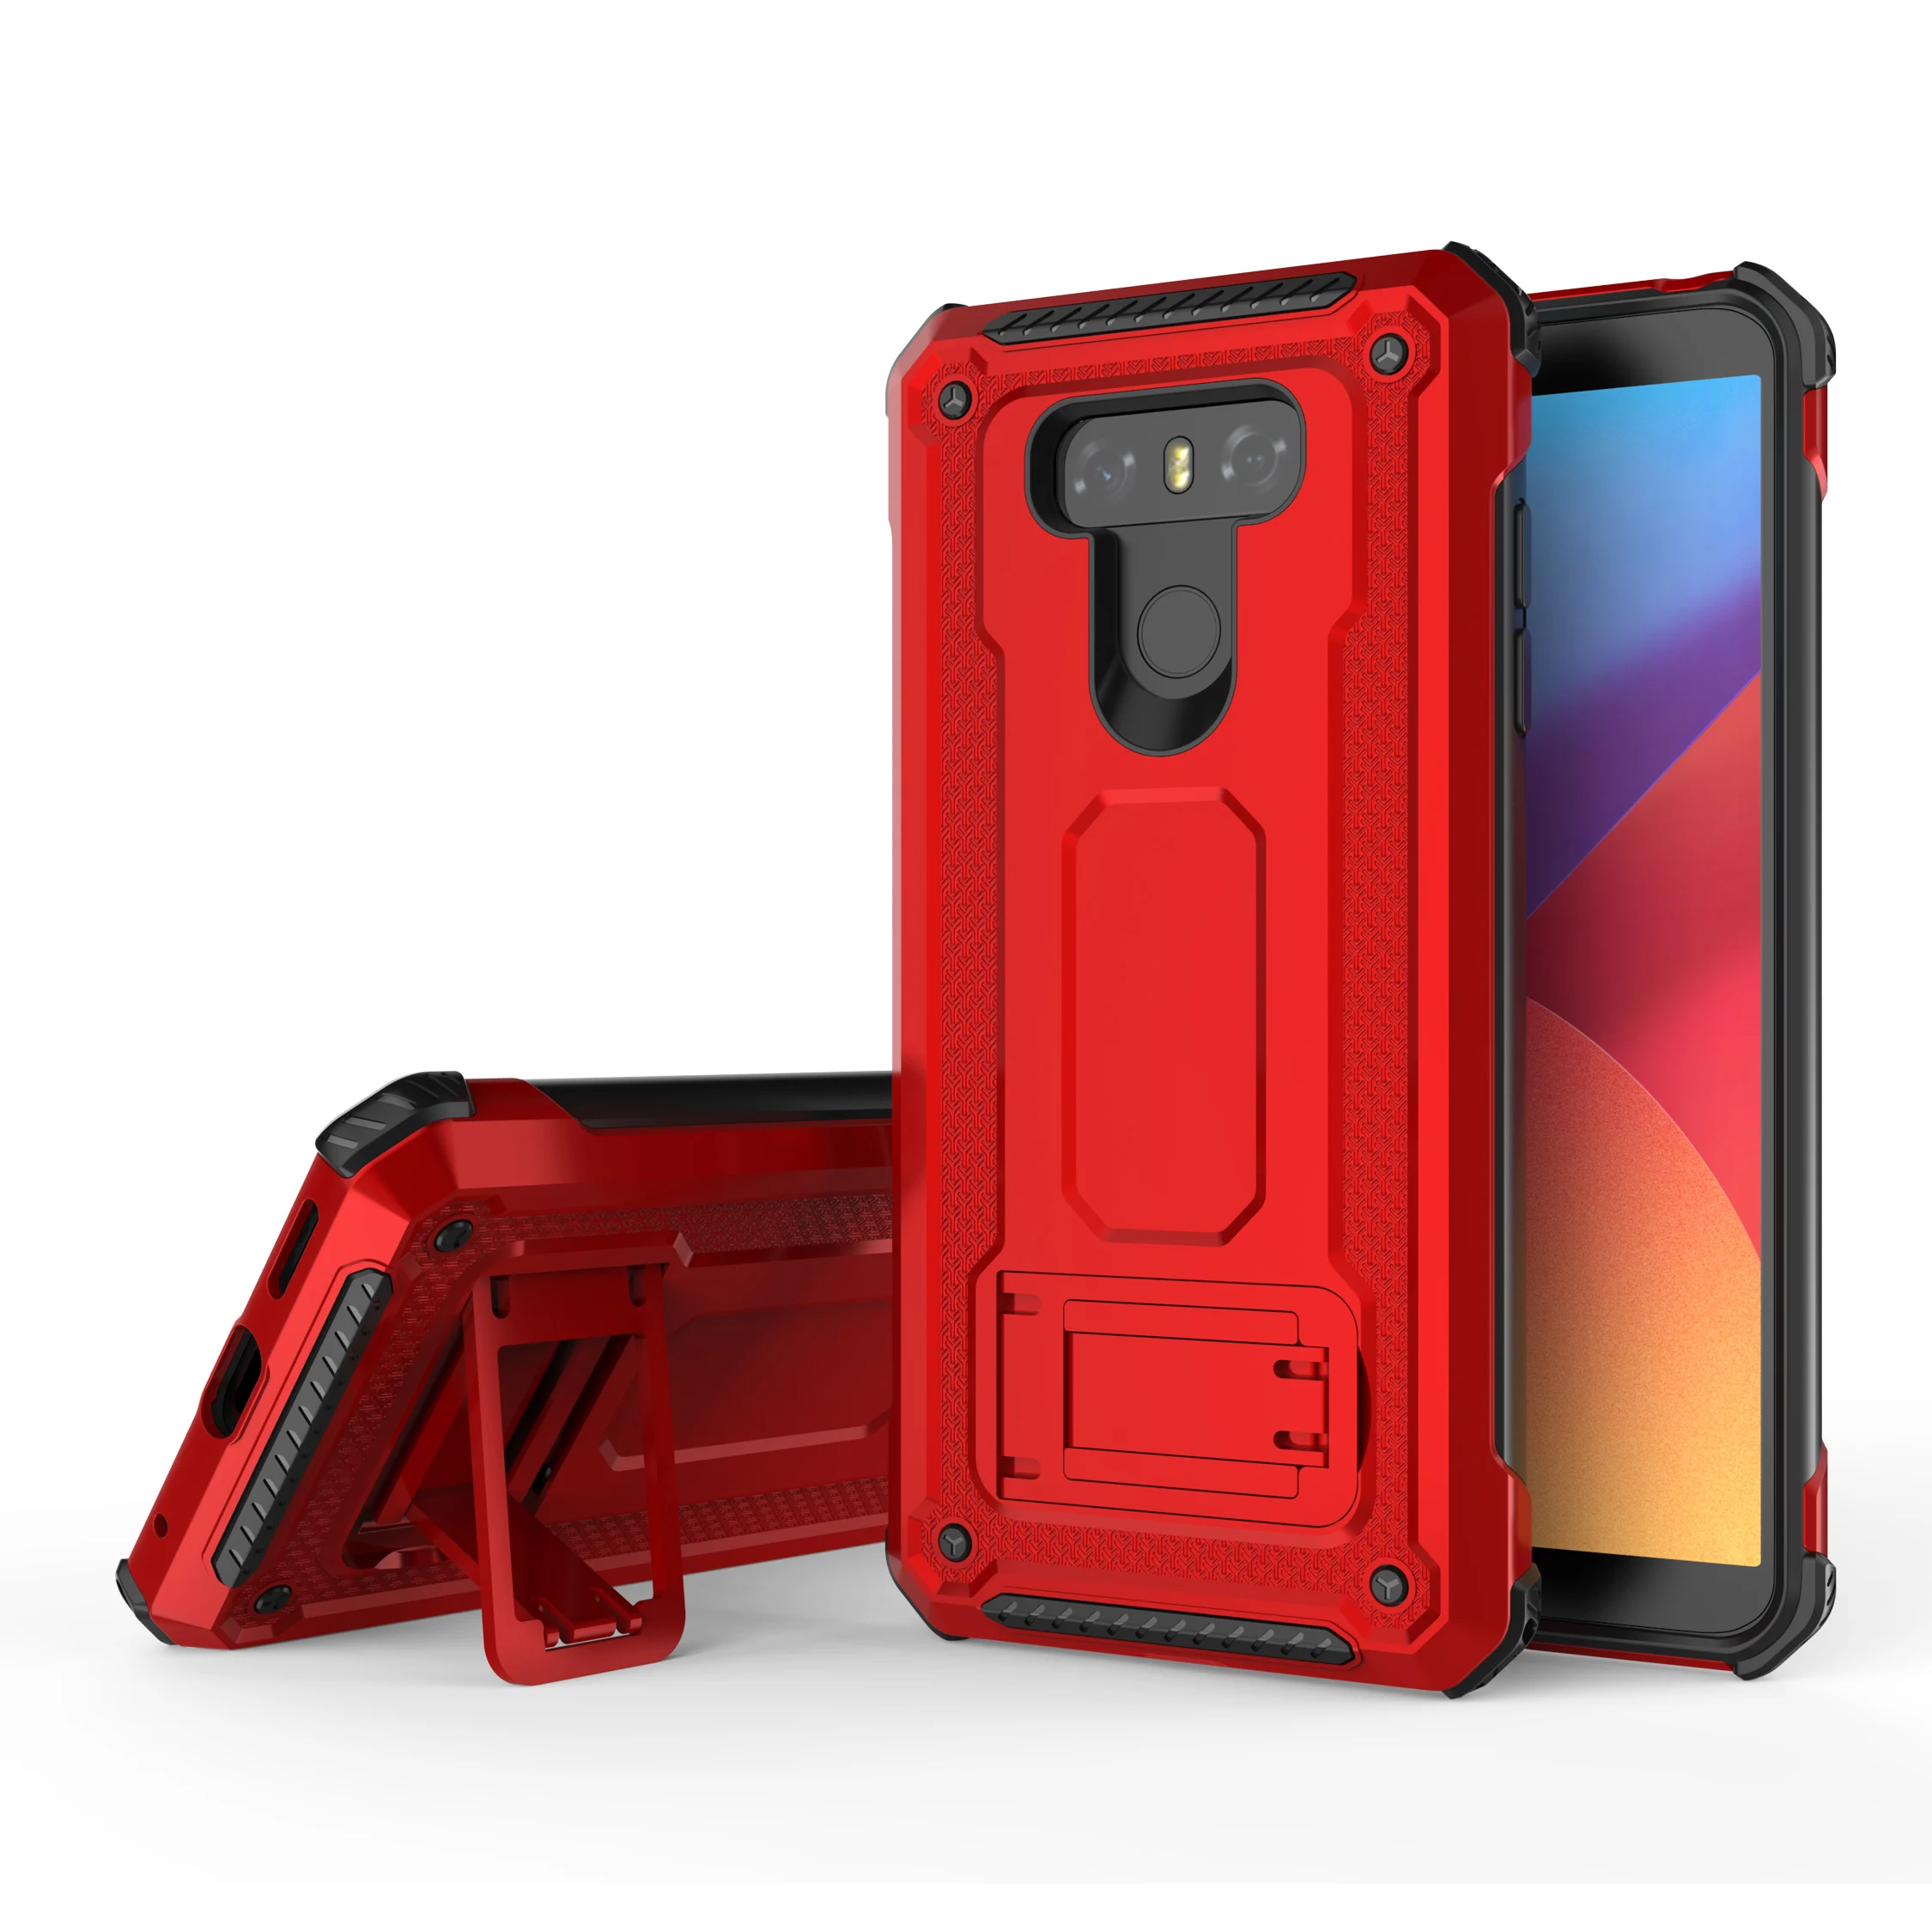 

Anccer Phone Cases with Kickstand for LG G6 armor Case Anti-Drop TPU+PC Heavy Duty Full Protect Cover for LG G6